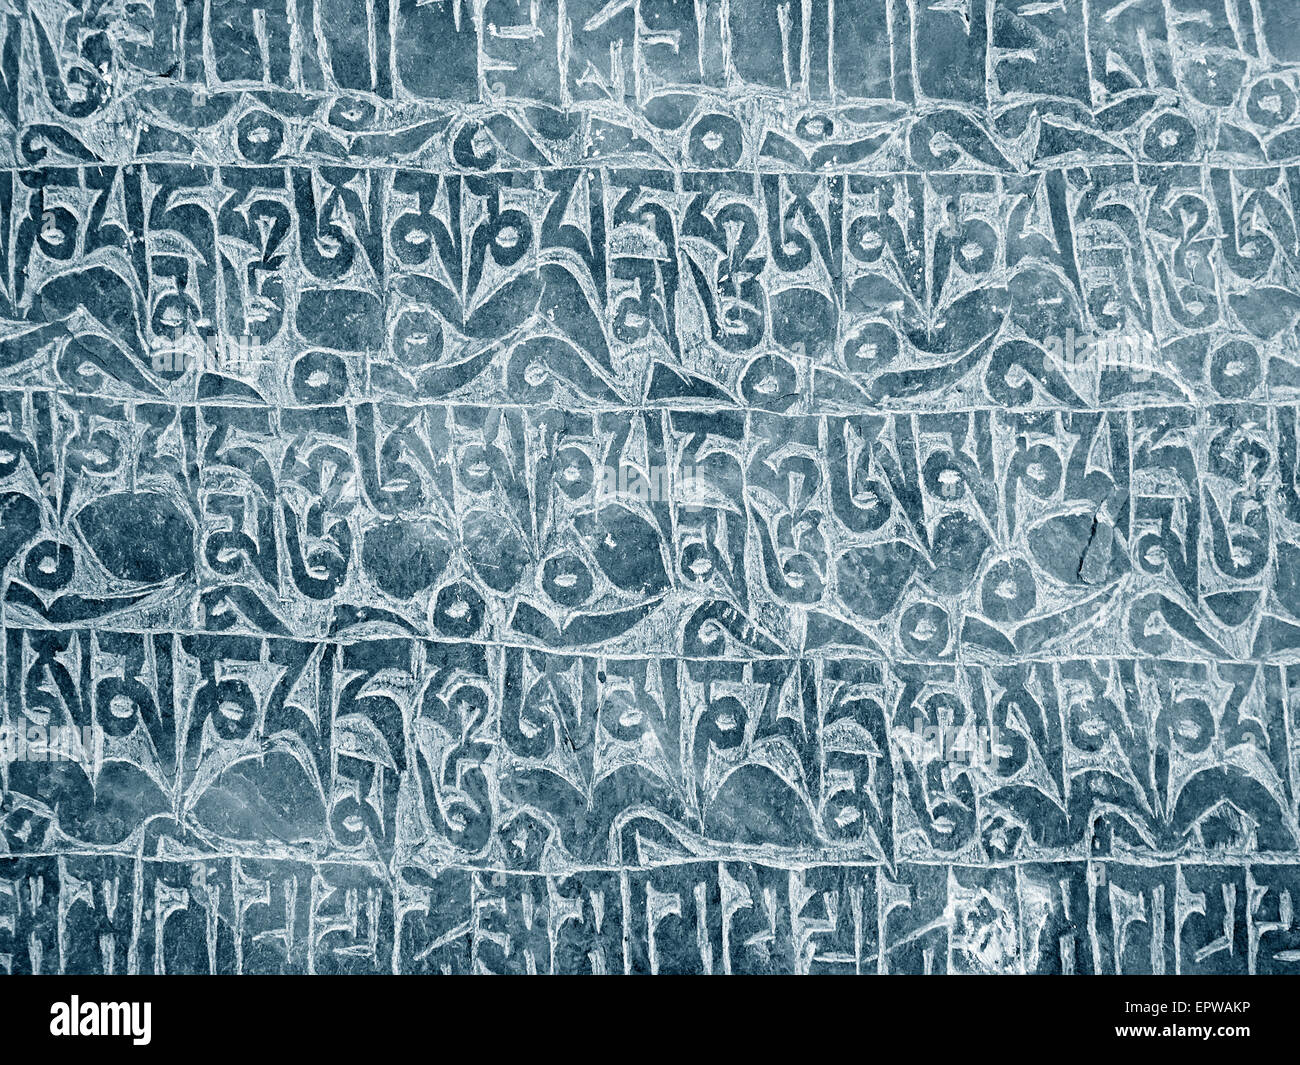 Buddhist mantra carved in stone as background Stock Photo